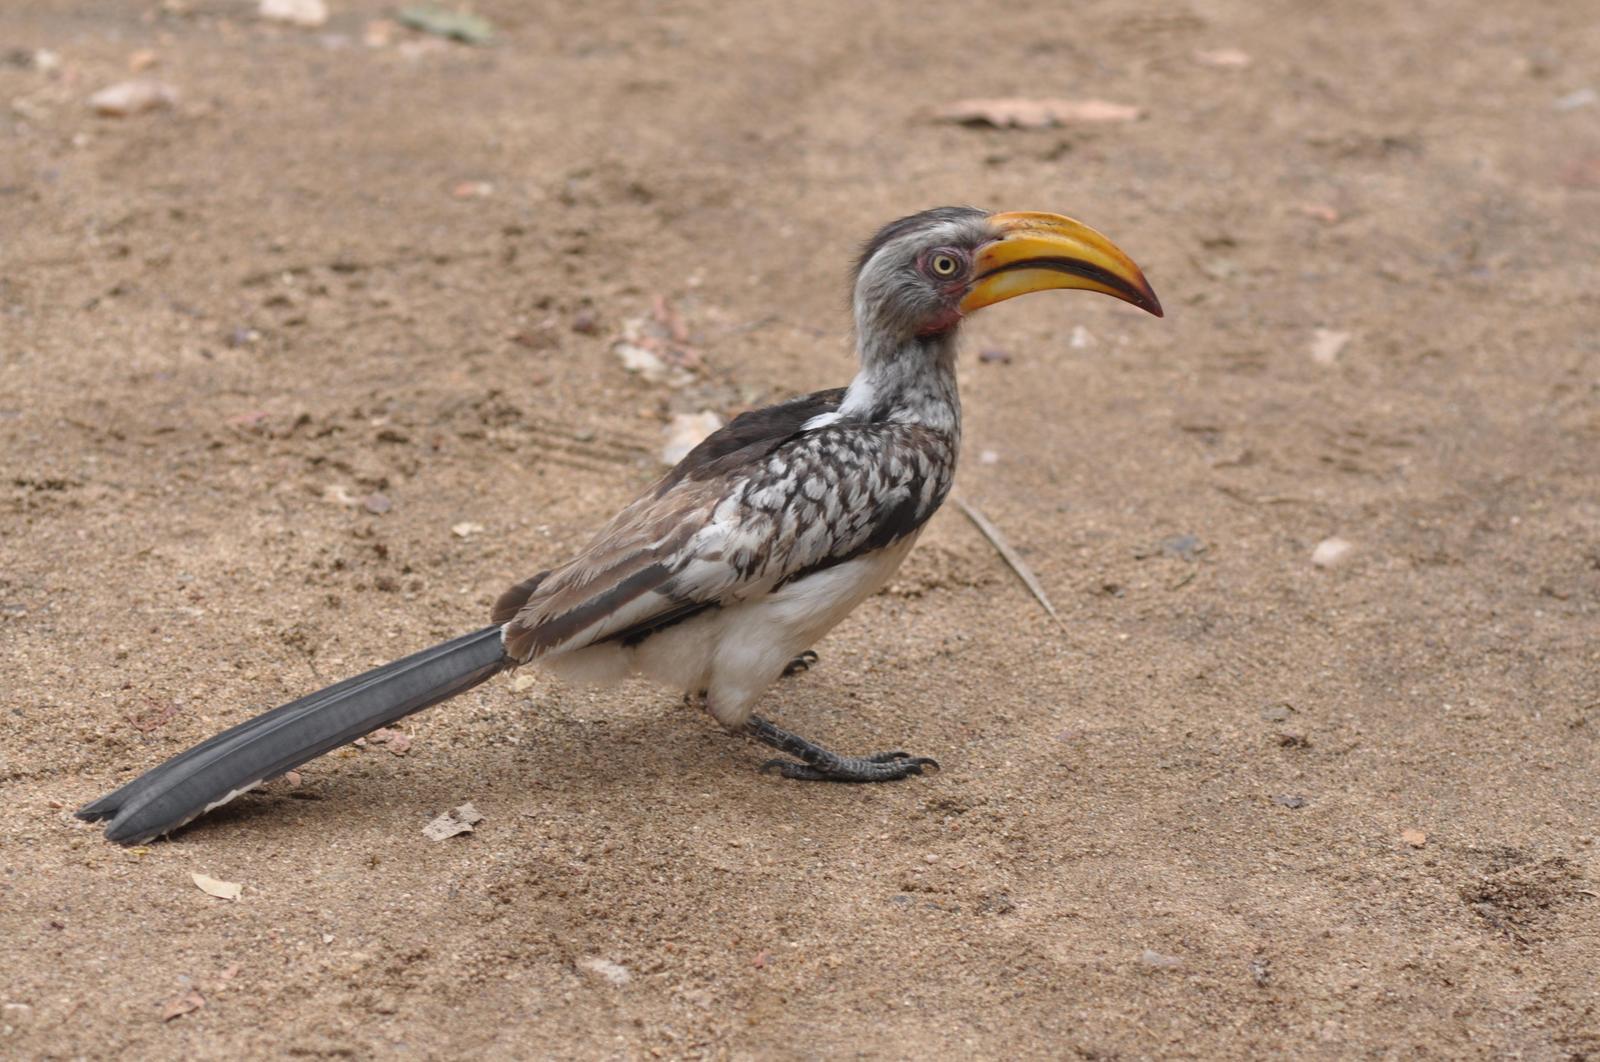 Southern Yellow-billed Hornbill Photo by Stef Stevens